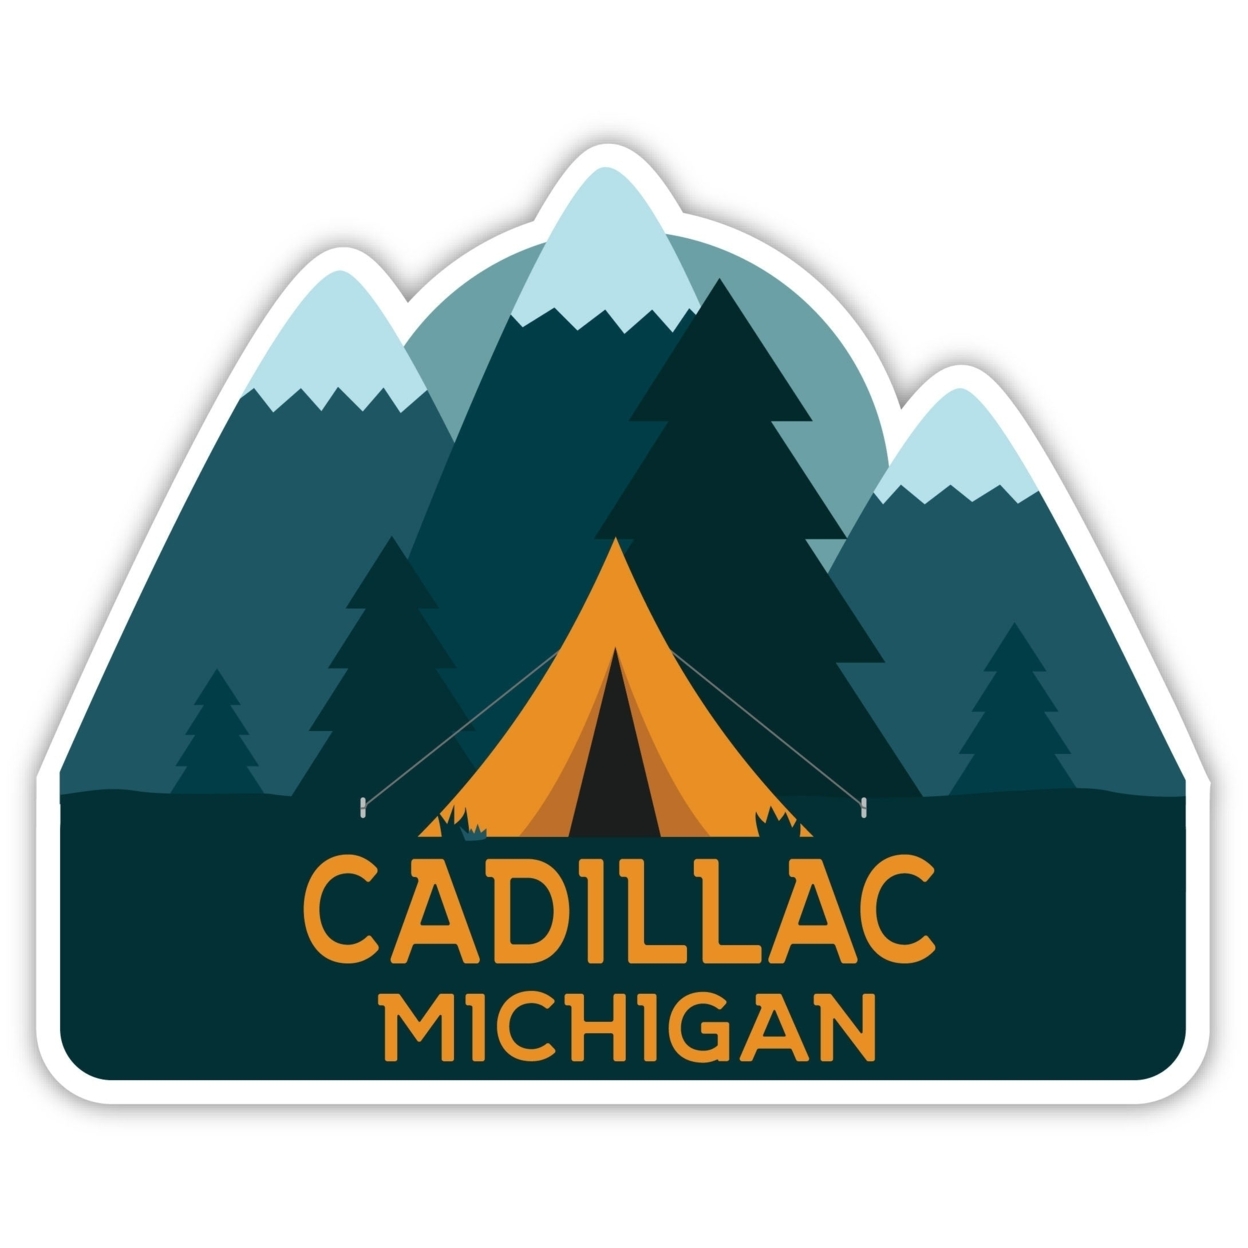 Cadillac Michigan Souvenir Decorative Stickers (Choose Theme And Size) - 4-Pack, 8-Inch, Tent